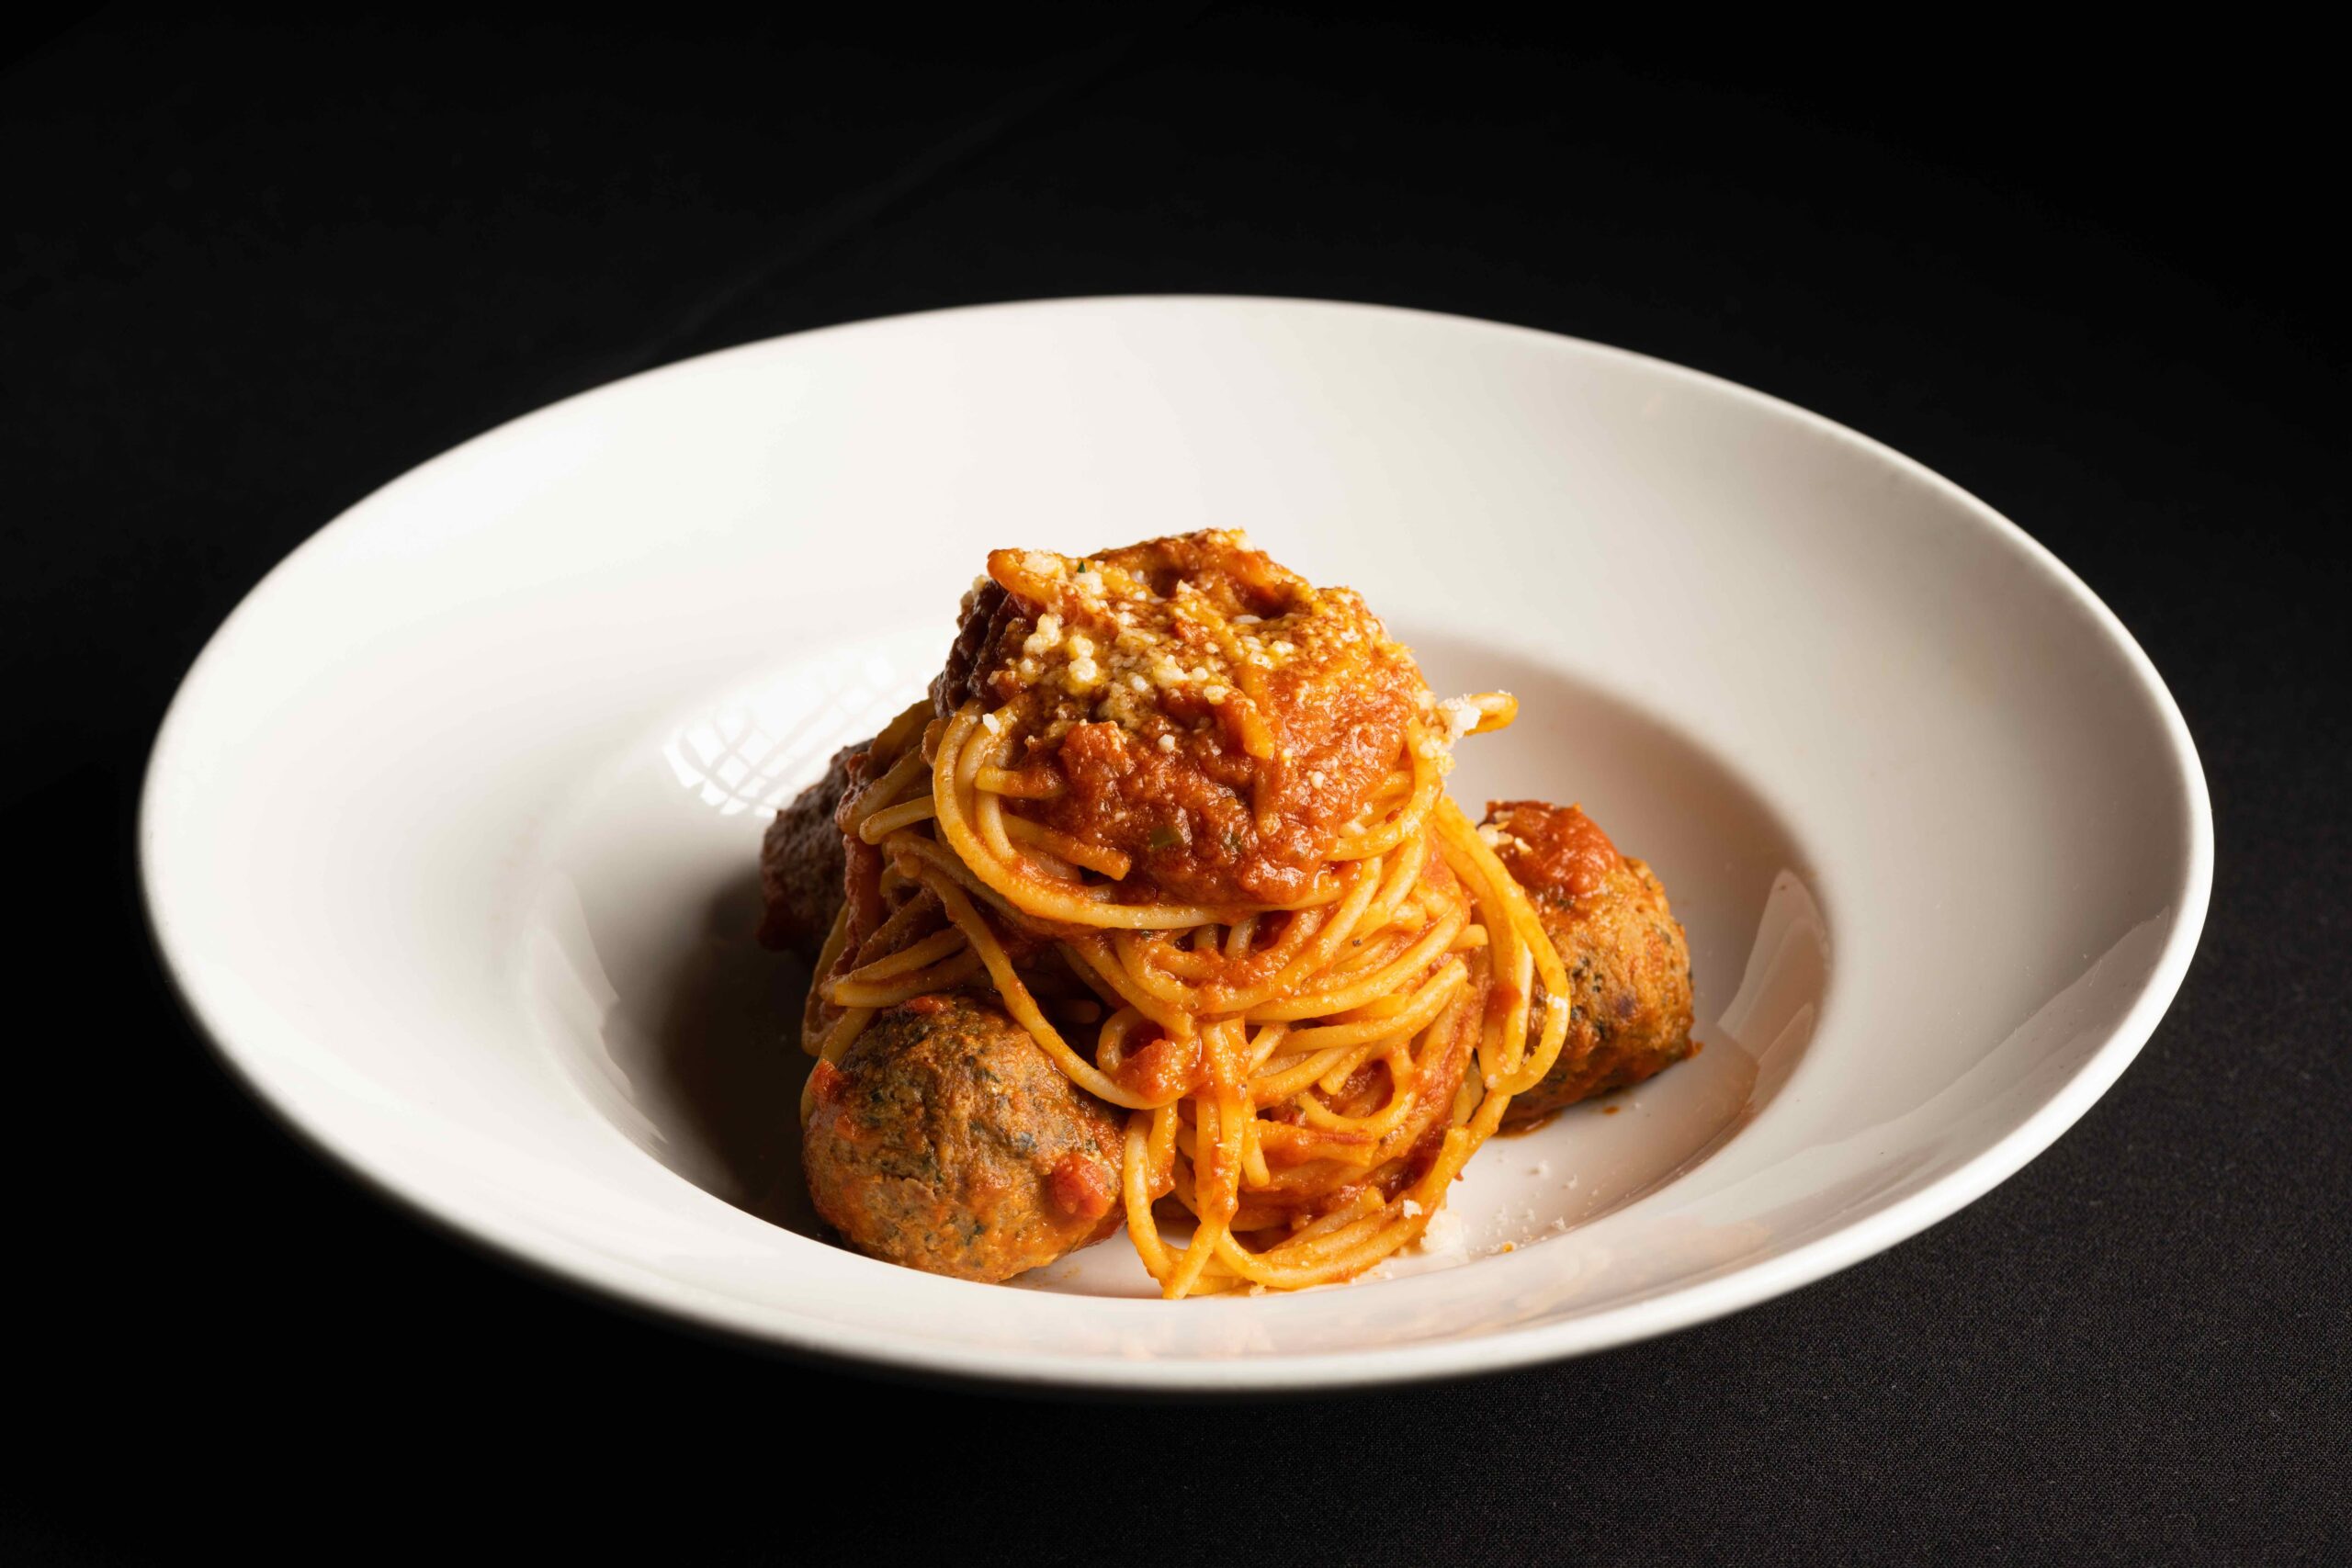 This Christmas Eve, come celebrate at BG in Beverly Hills. BG guests will enjoy Chef Lisi’s modern classics like the delicious BG Spaghetti Meatballs.